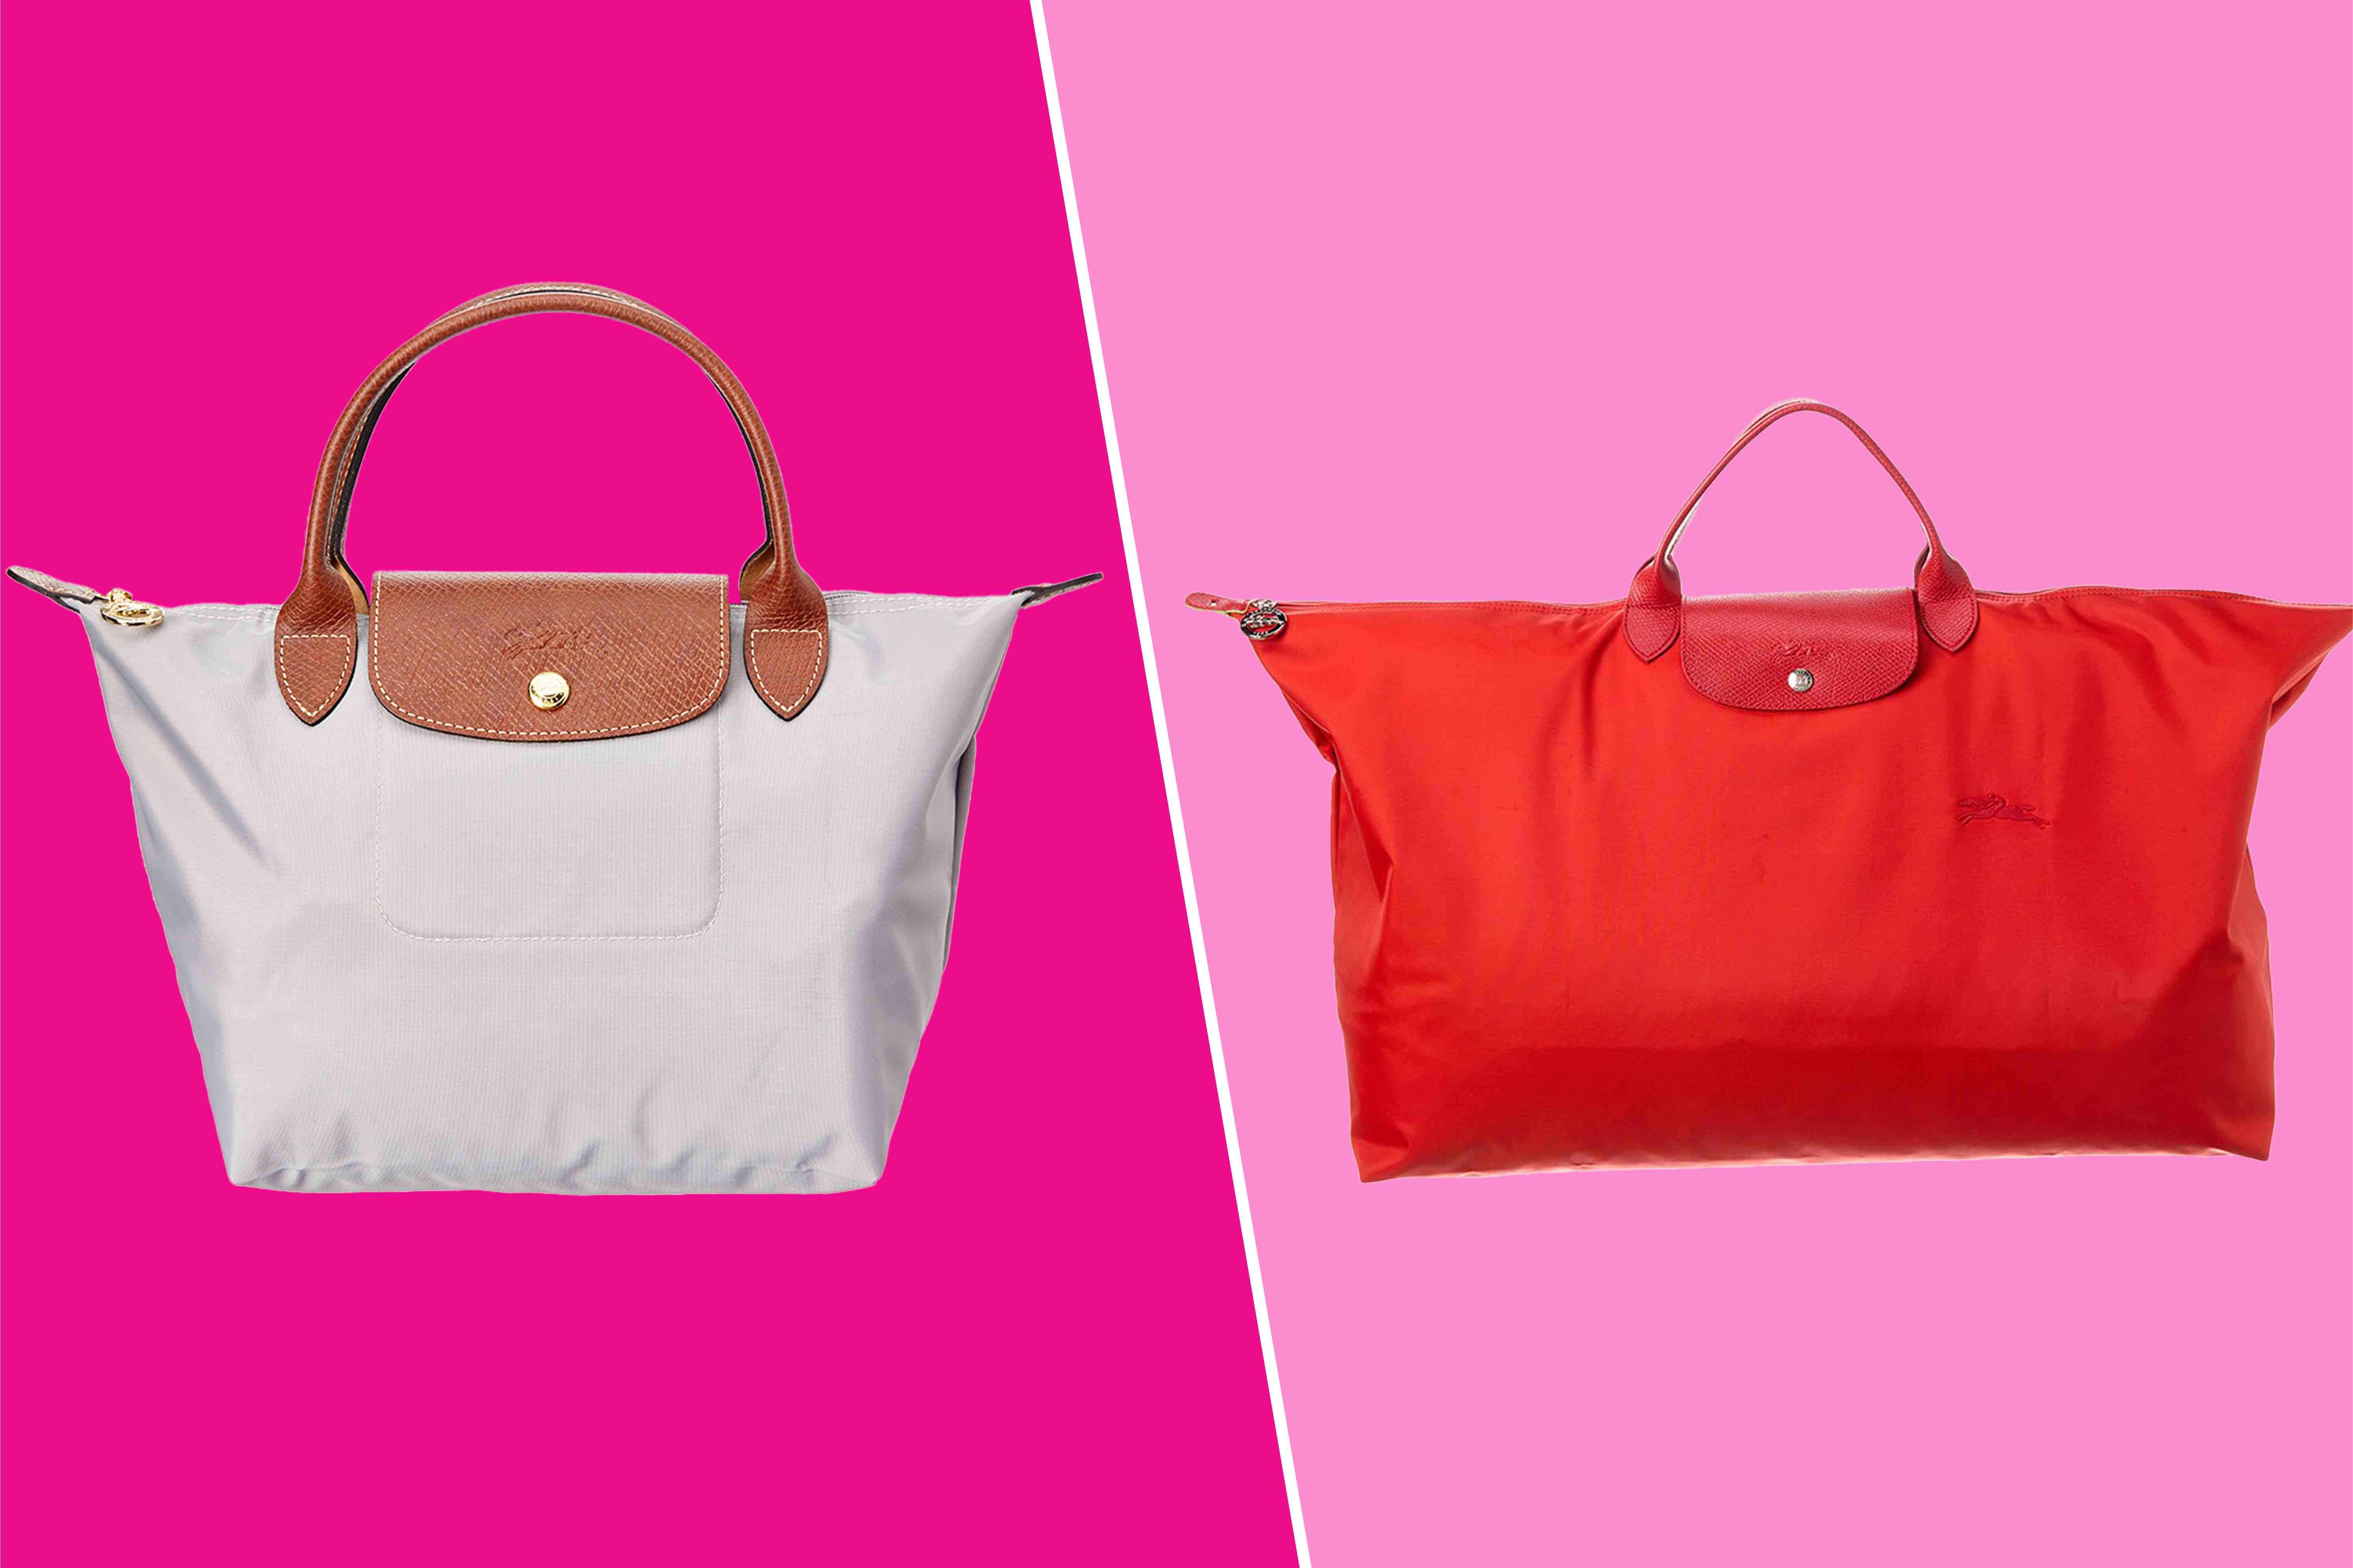 Longchamp Bags Are on Sale from $100 During This 48-Hour Flash Sale